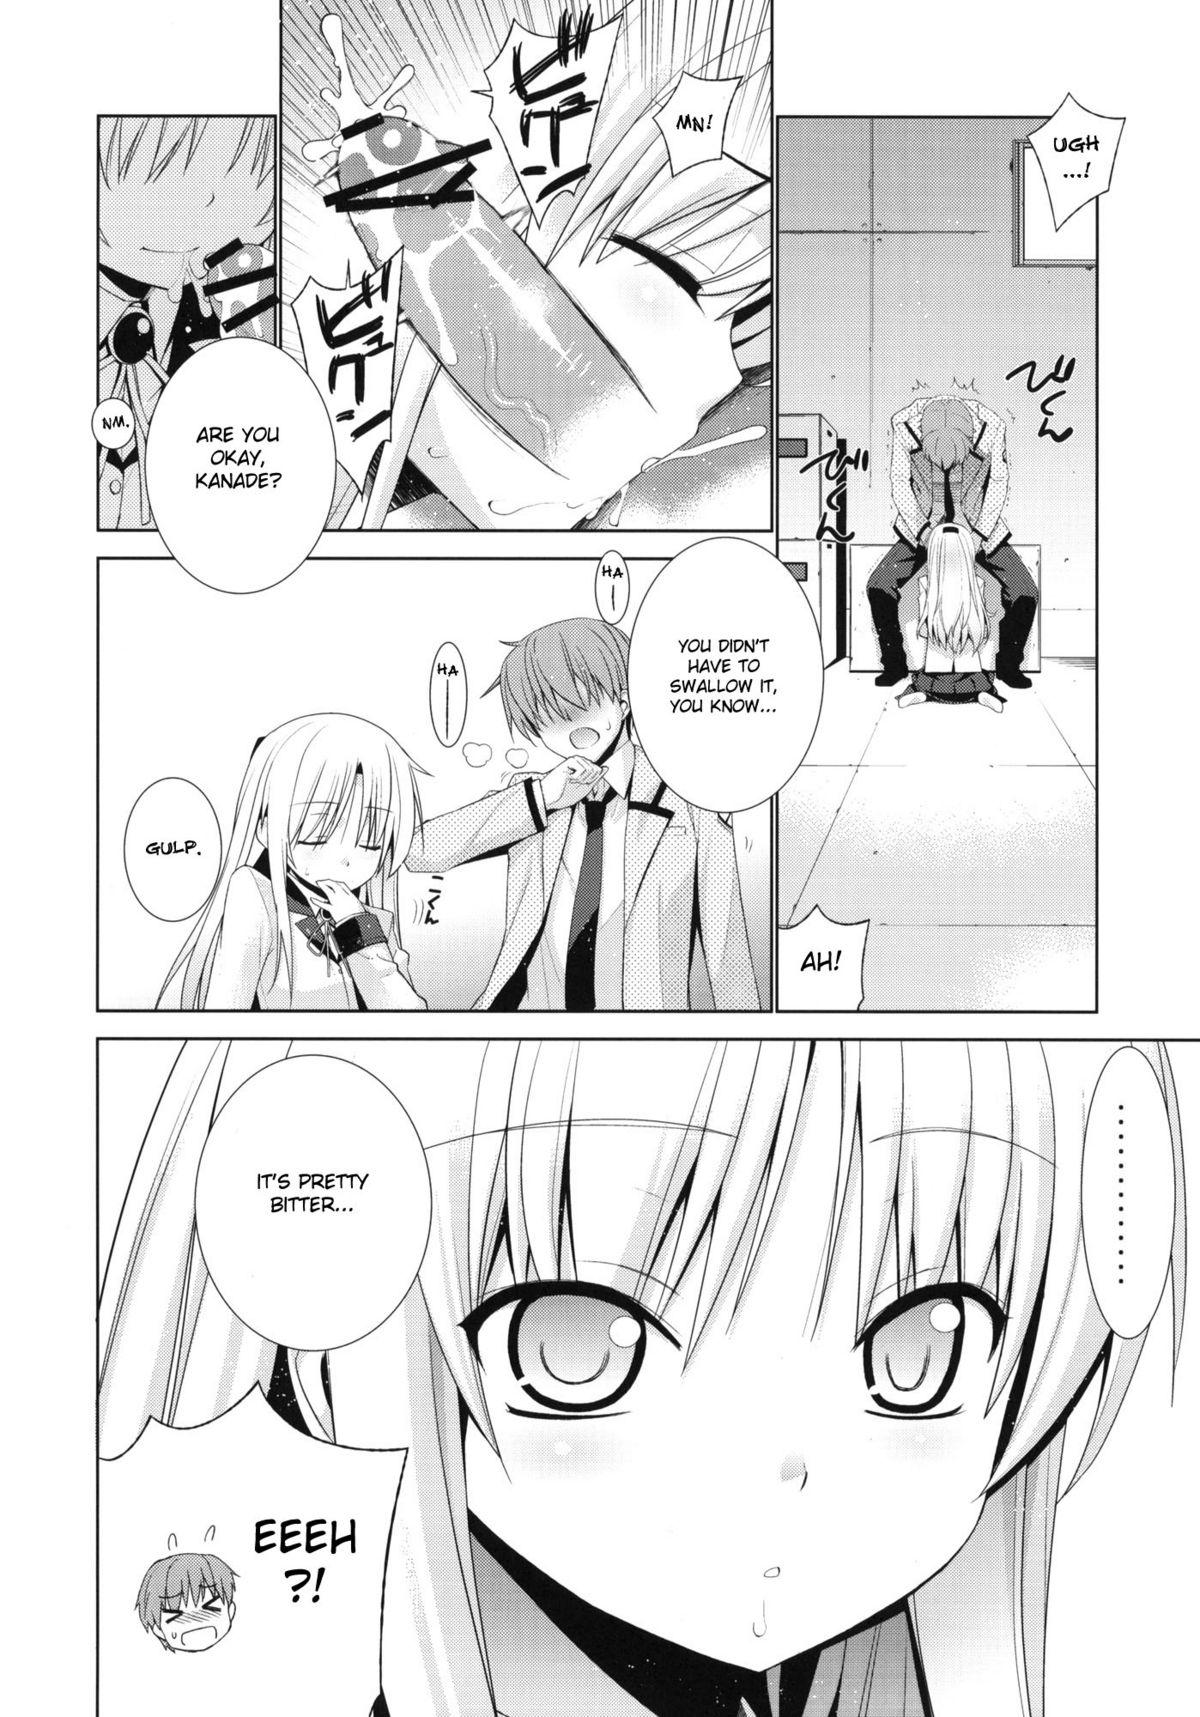 Asian Angel Days - Angel beats Culote - Page 5